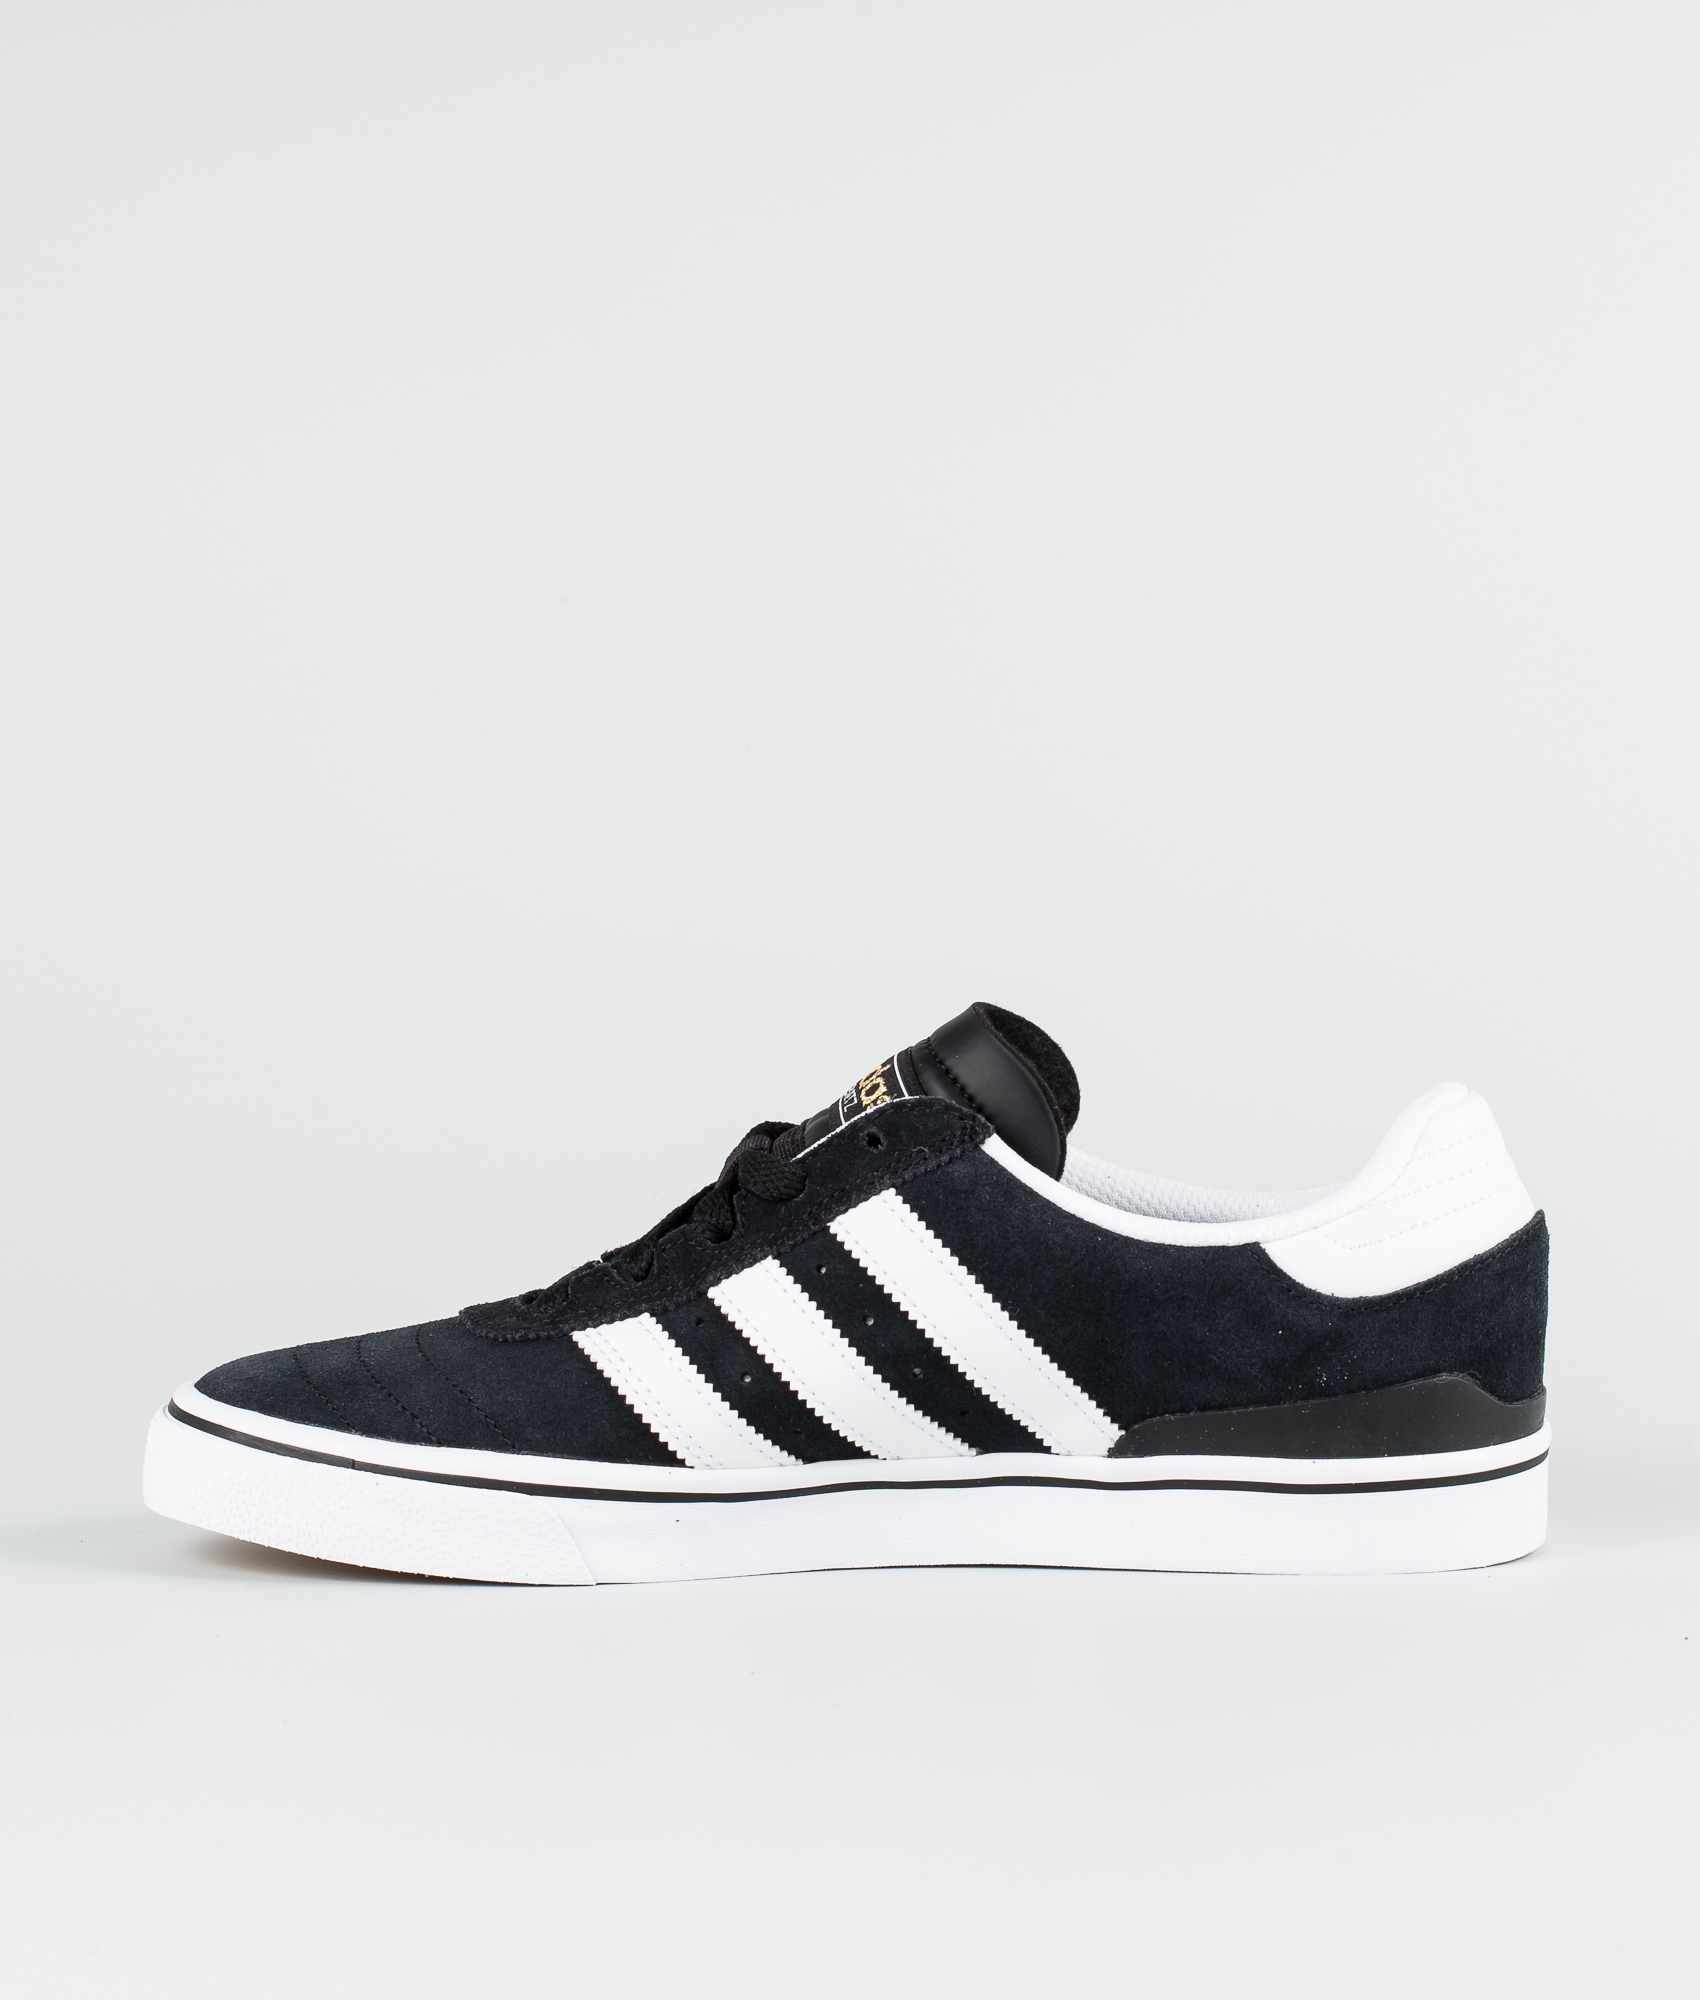 black and white adidas skate shoes